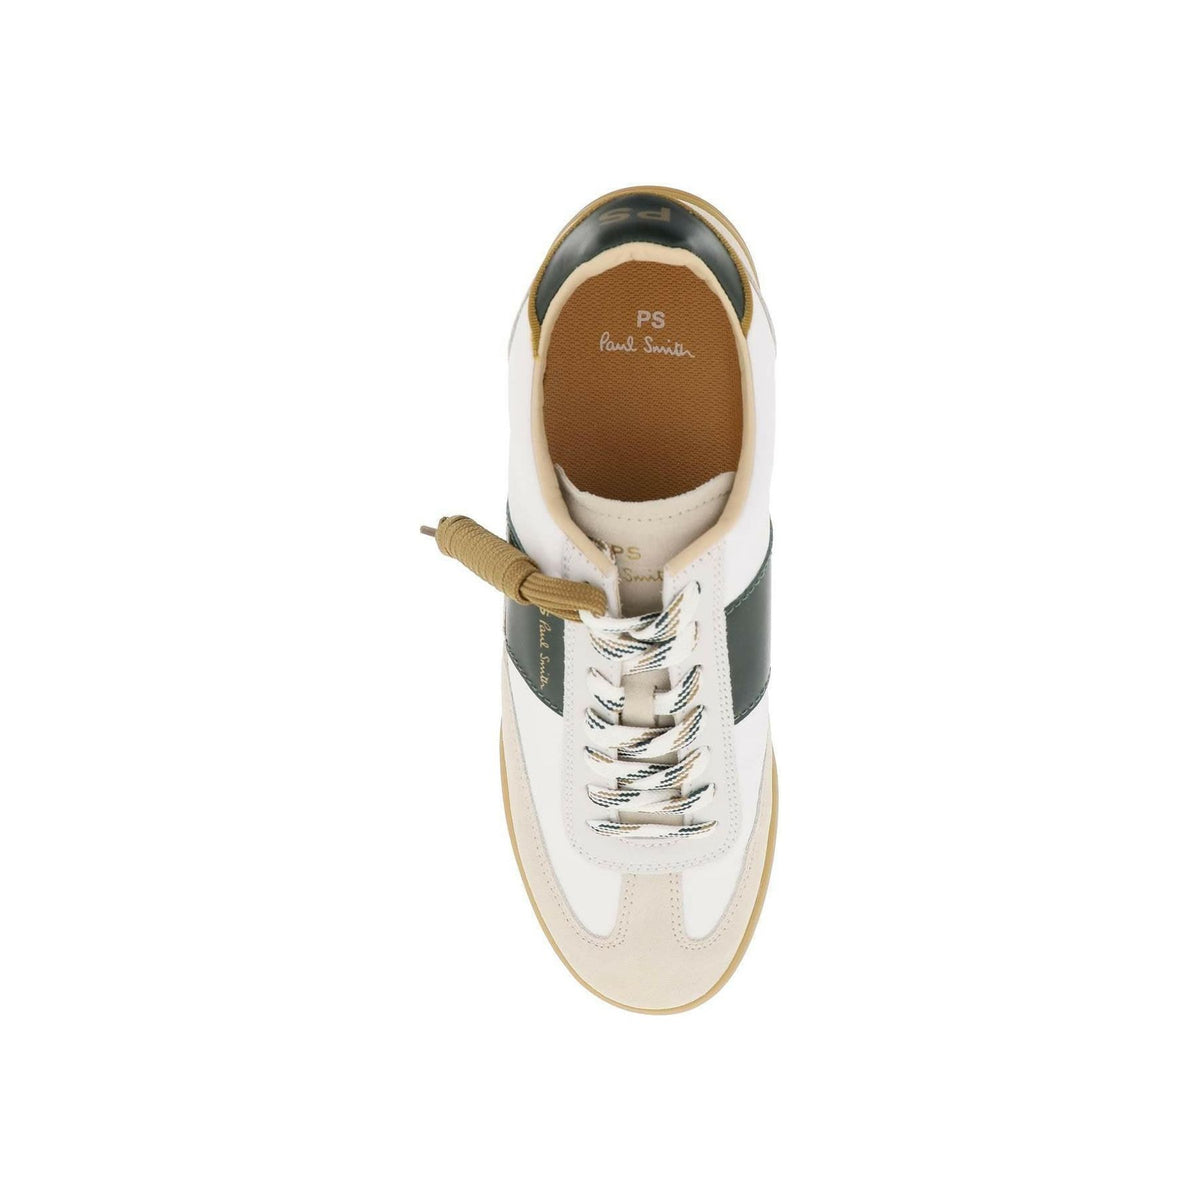 Leather And Nylon Dover Sneakers PS PAUL SMITH JOHN JULIA.